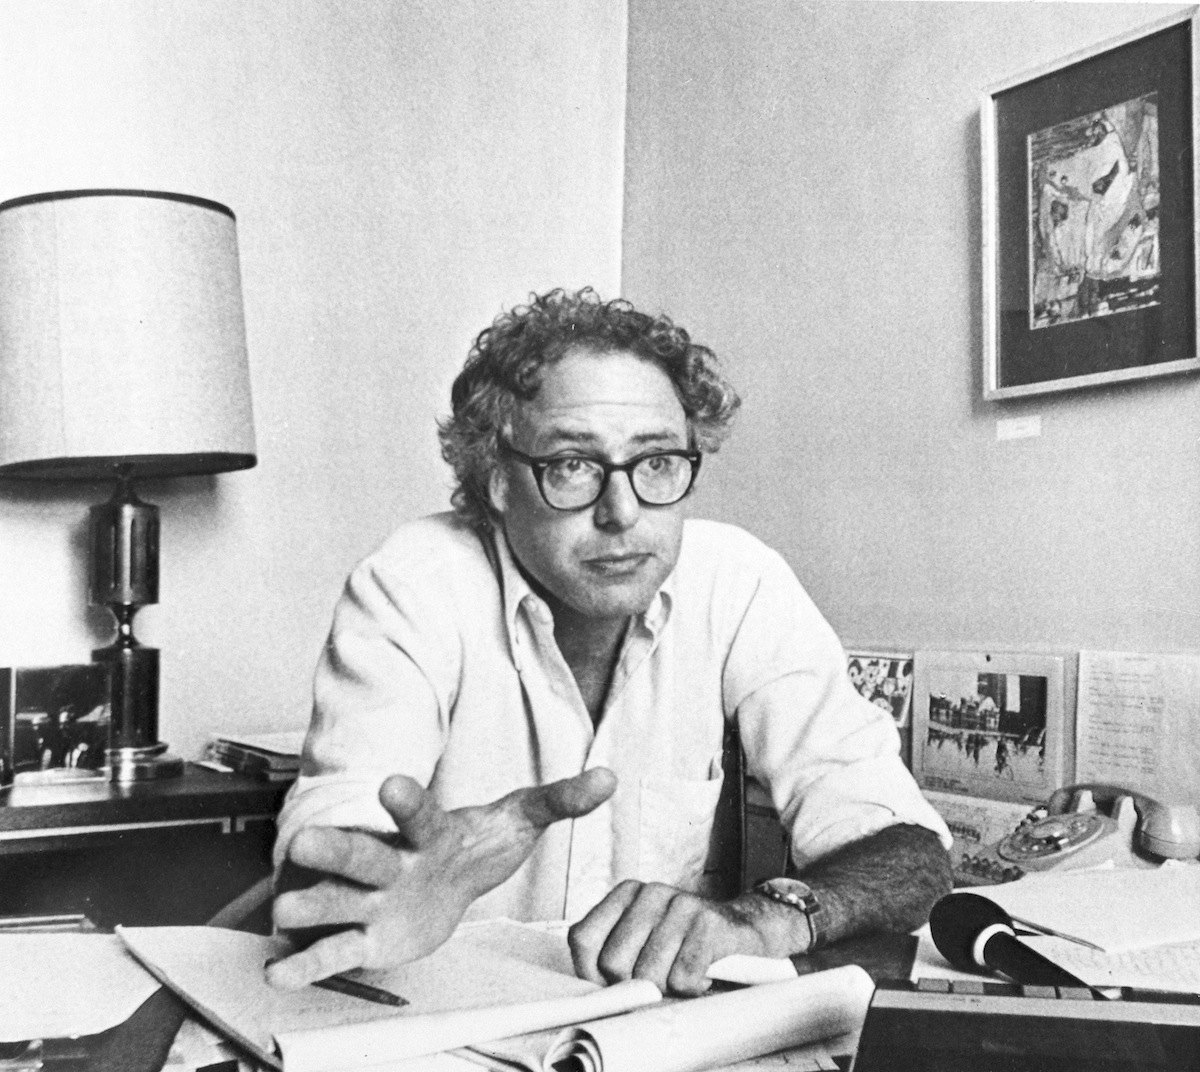 Six months after he scored a surprise victory to become mayor of Burlington, Vermont's largest city, Bernie Sanders is pictured at city hall on Sept. 15, 1981. (Donna Light&mdash;AP)